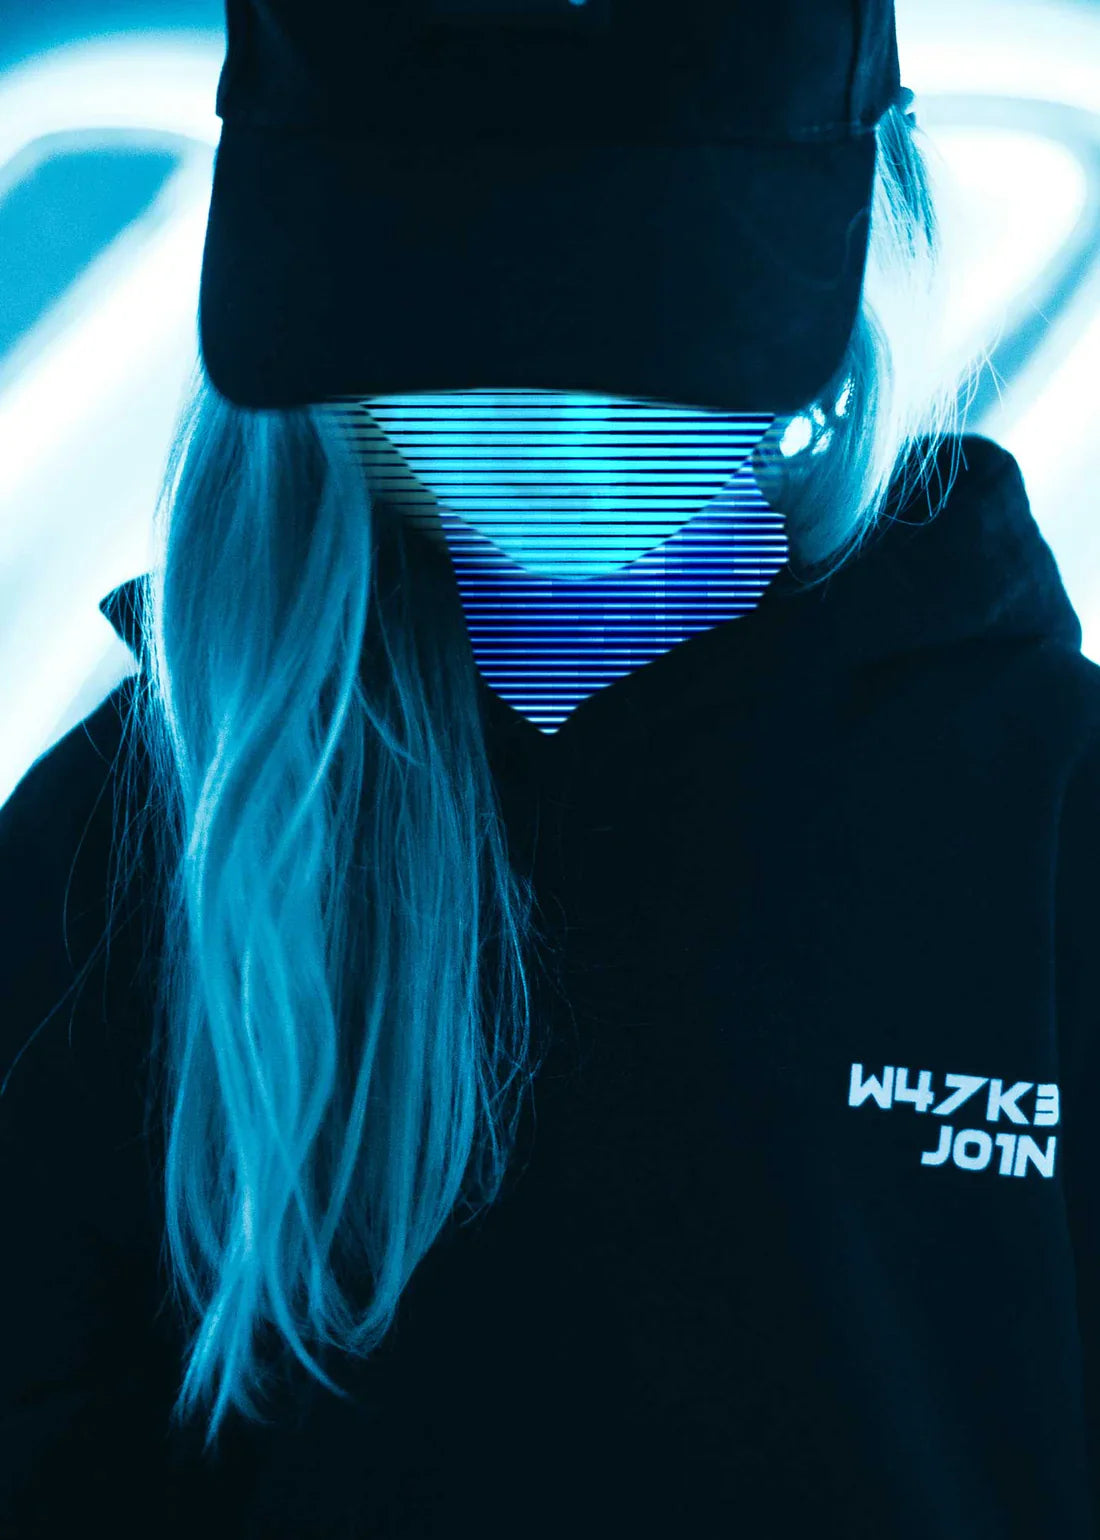 A child in a black Alan Walker hoodie and LED mask, embracing the electro music culture in style.